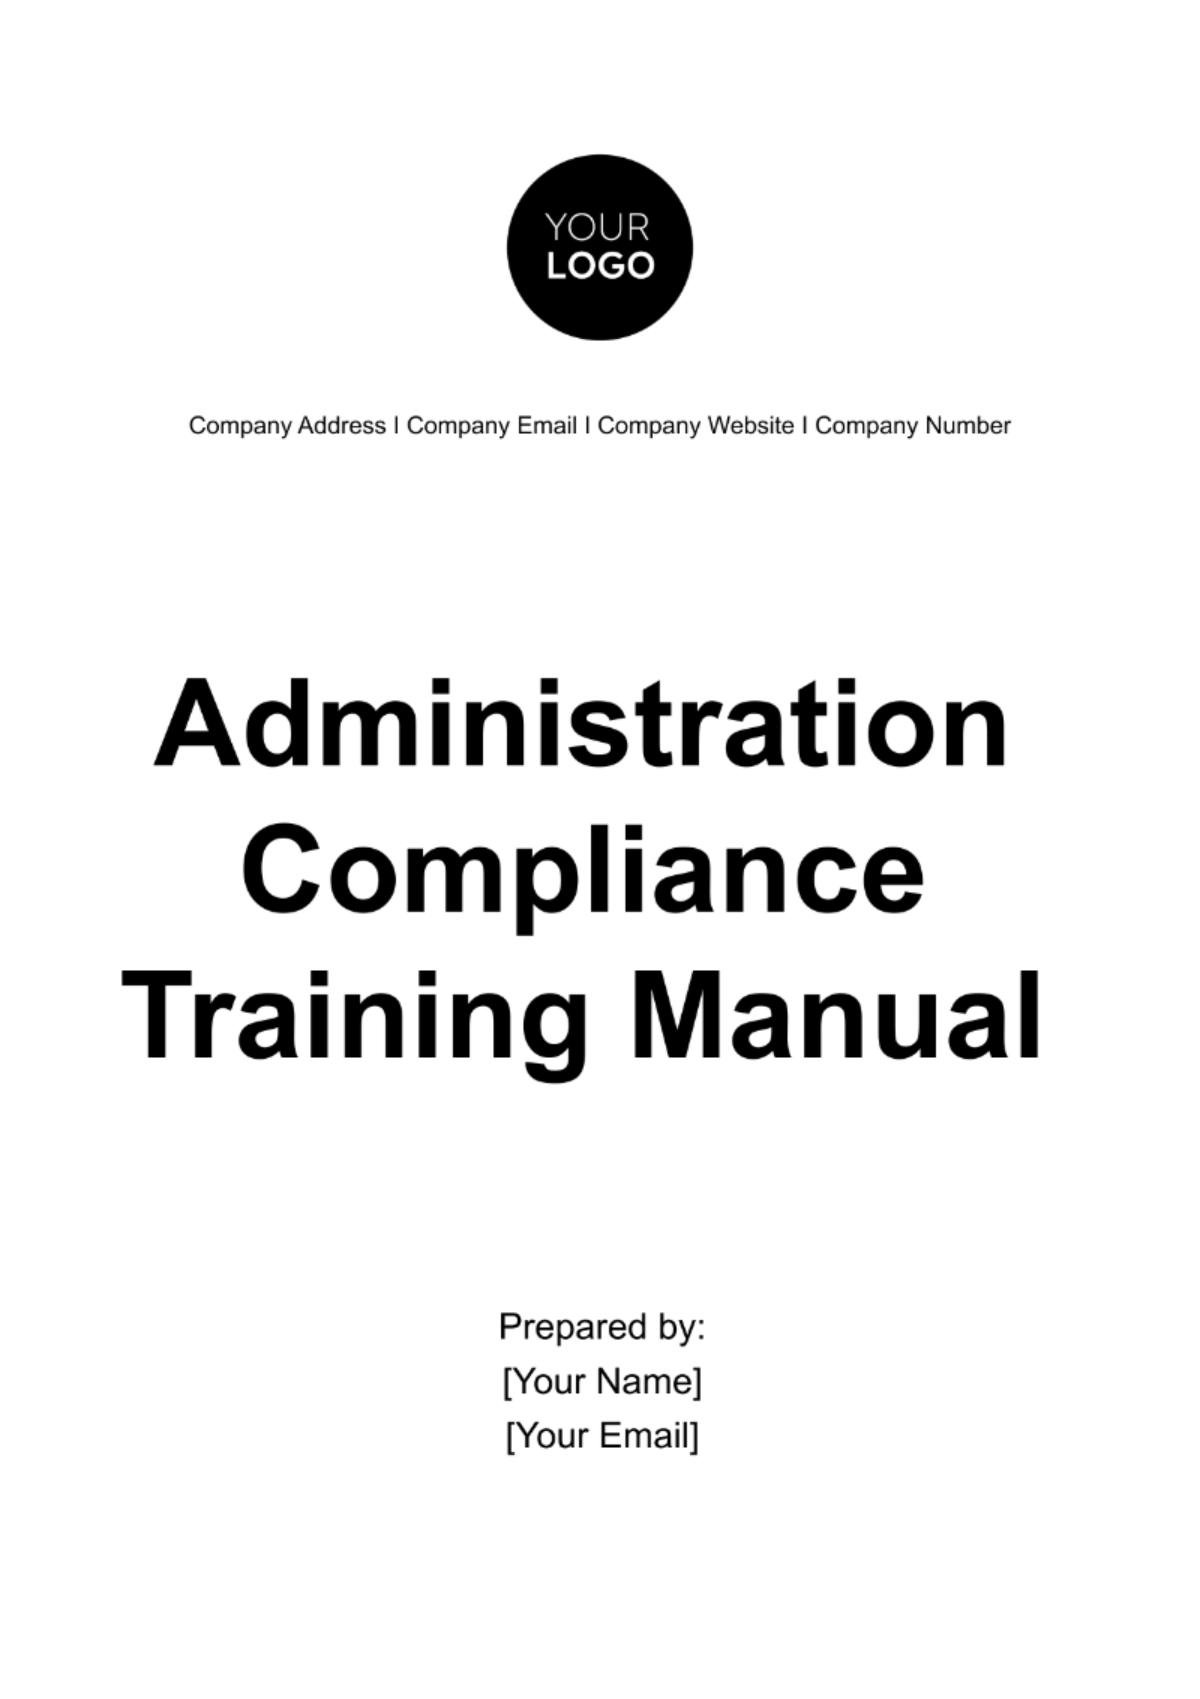 Administration Compliance Training Manual Template